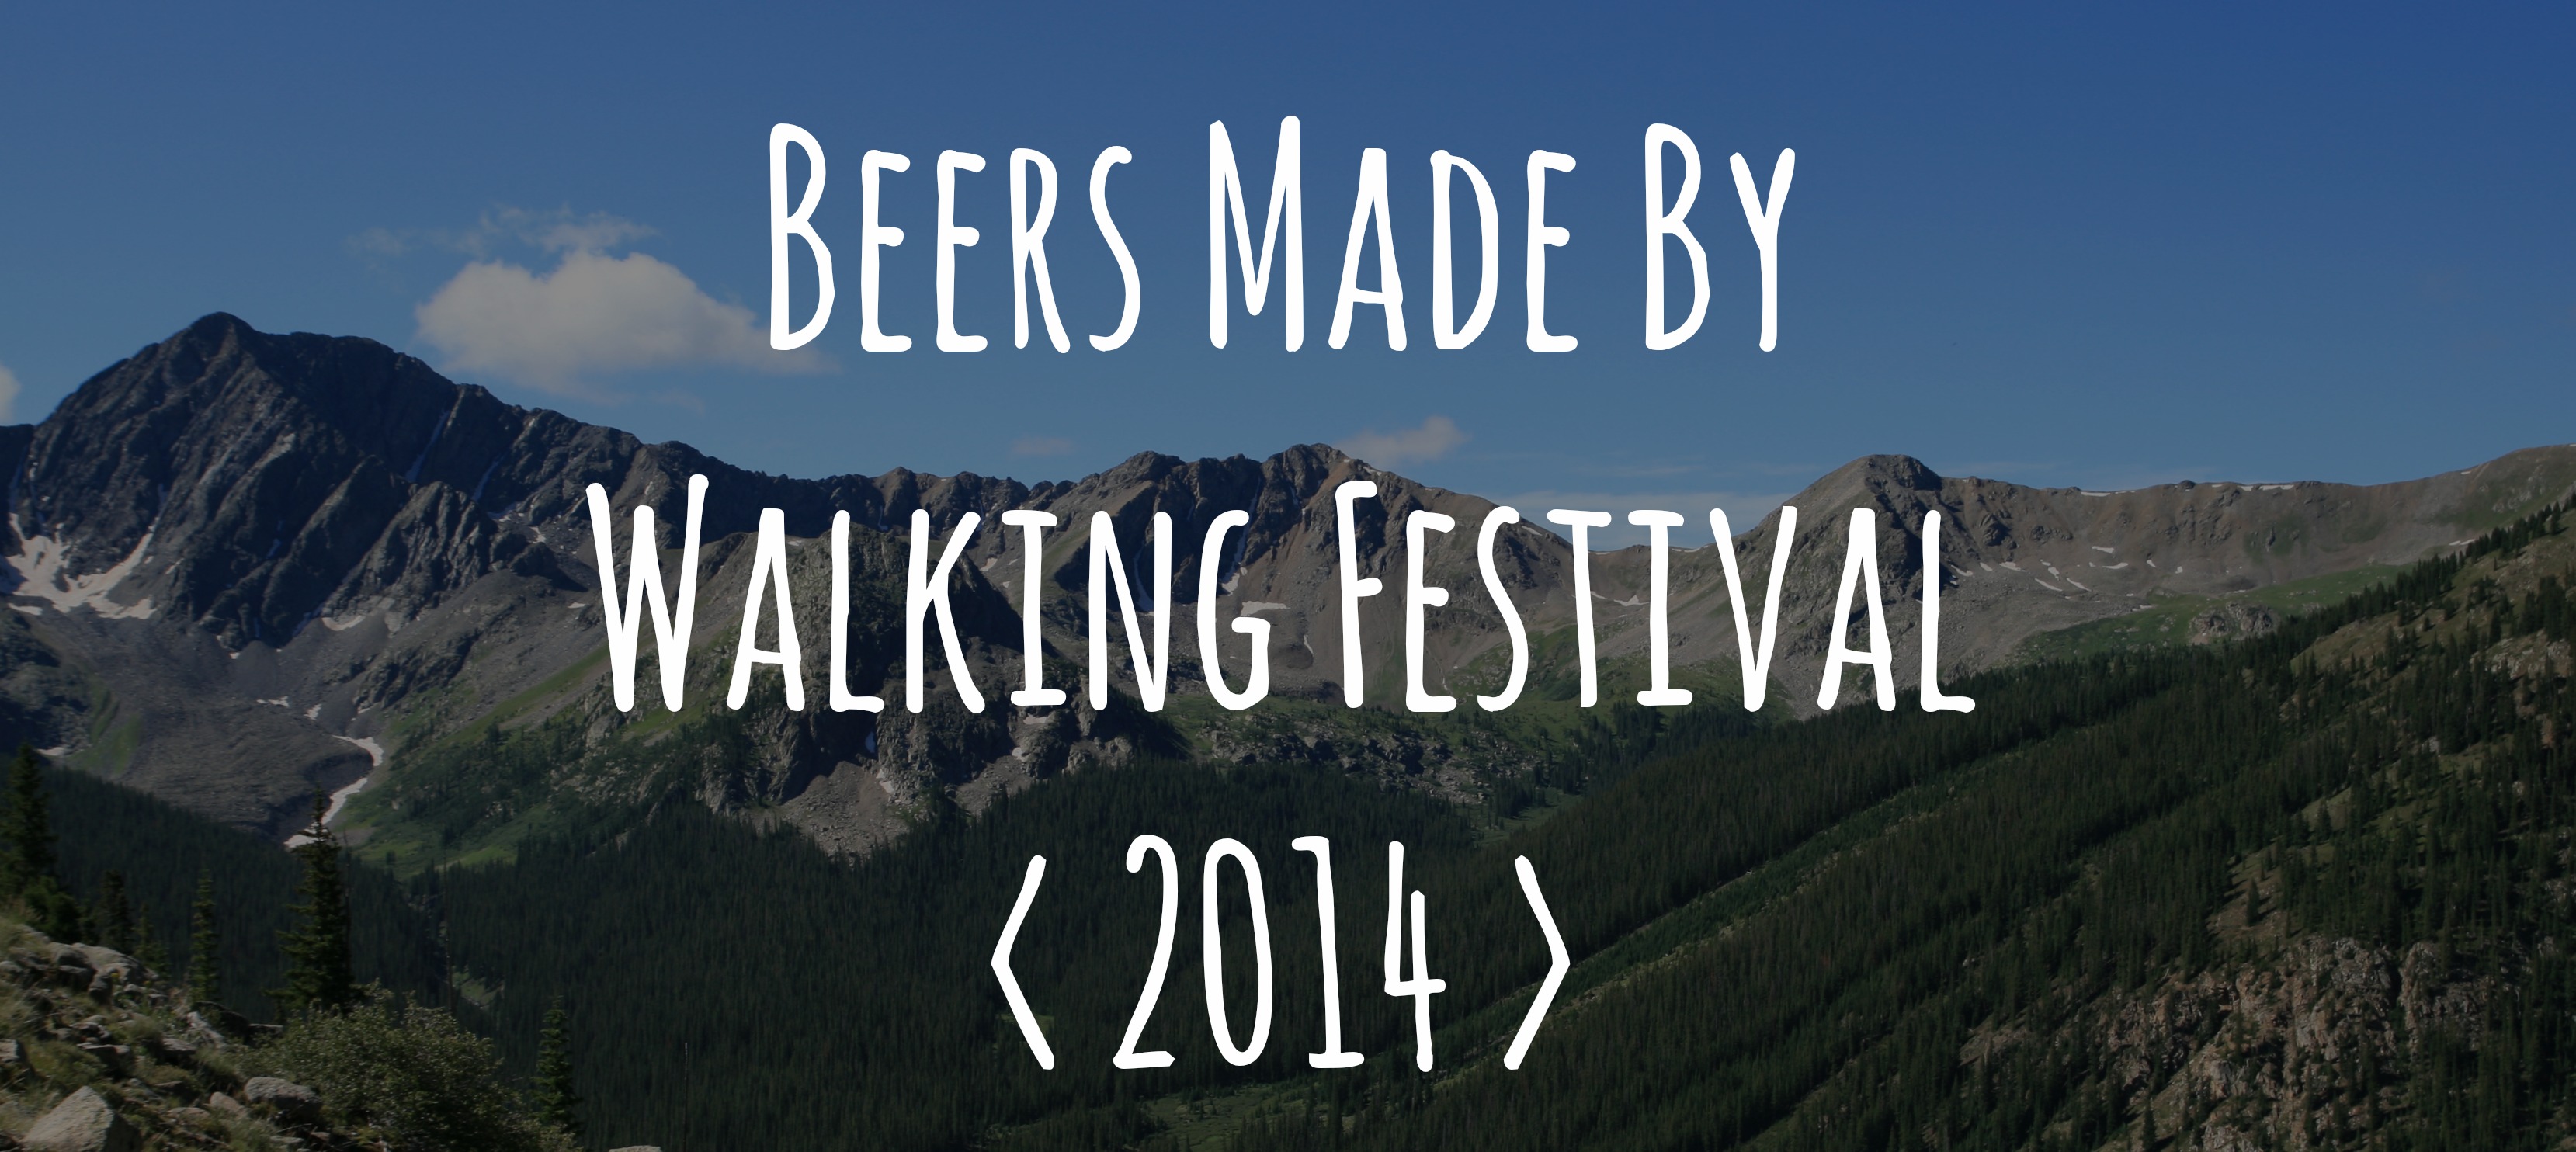 Event Preview | Beers Made By Walking Festival